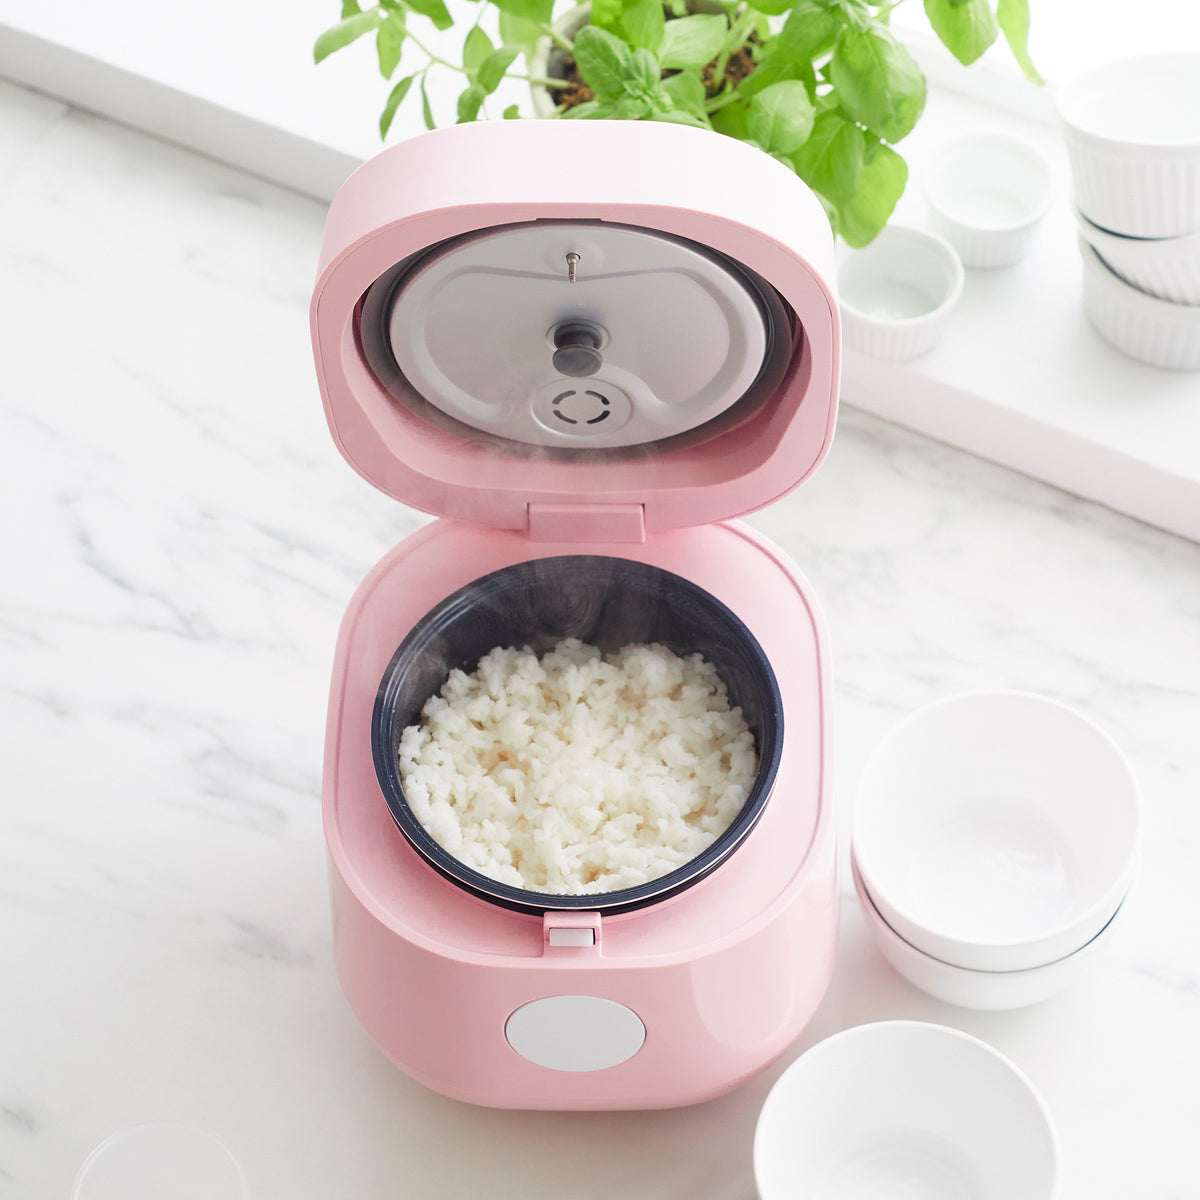 Greenlife Turquoise Ceramic Electric Sandwich Maker (Pink)